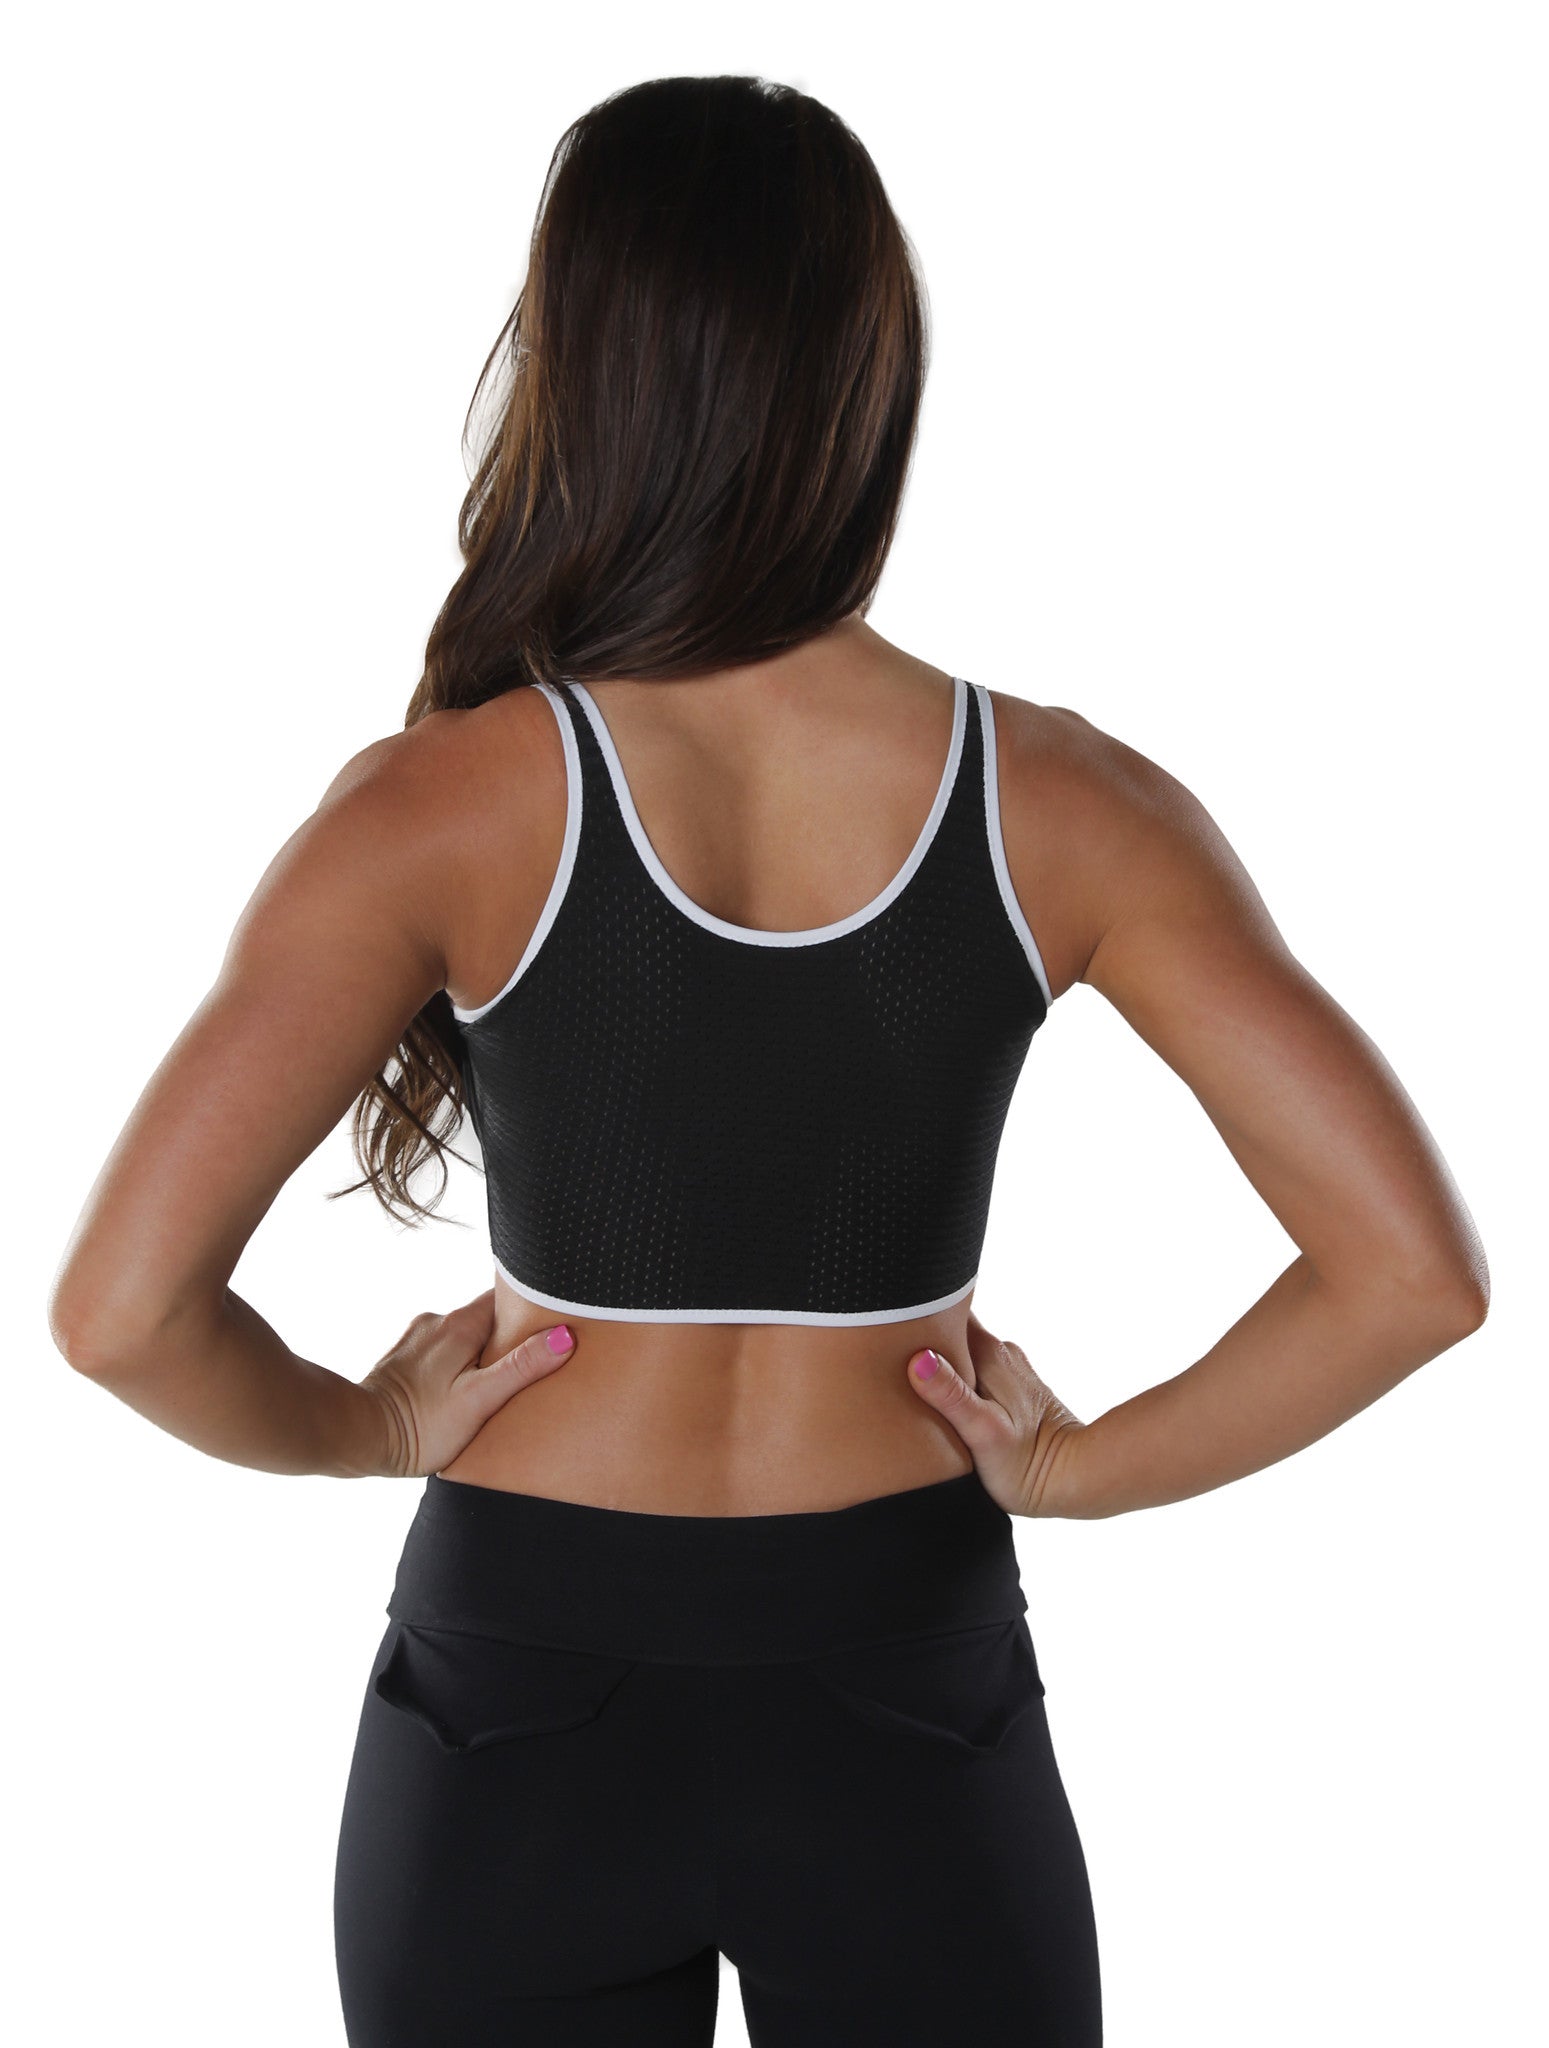 Perfect sports bra for any kind of activity